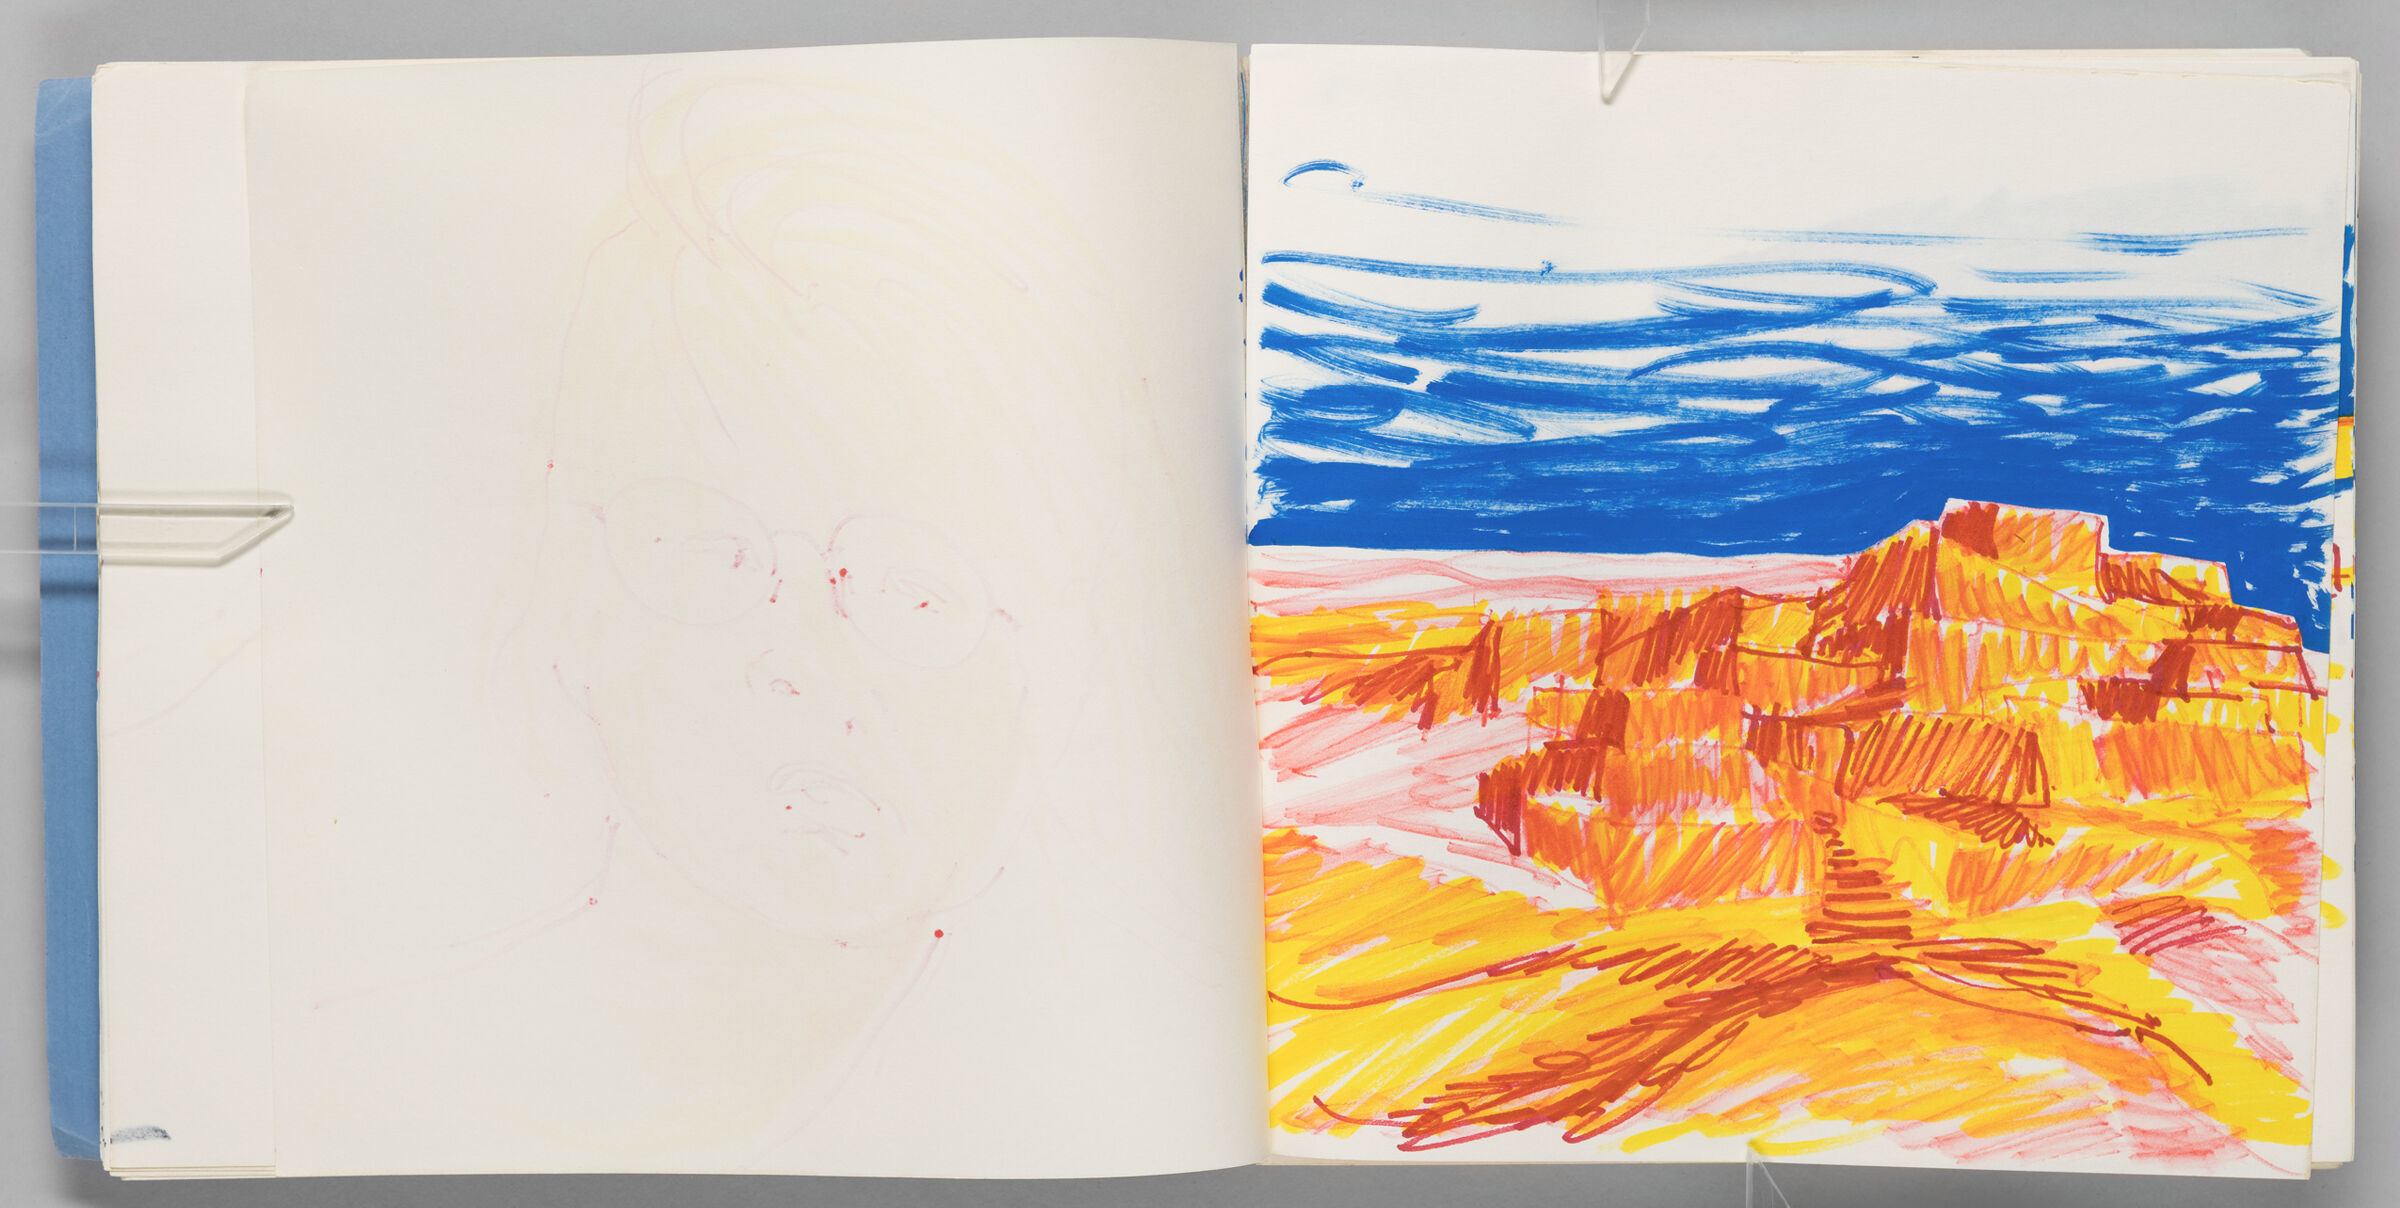 Untitled (Bleed-Through Of Previous Page, Left Page); Untitled (View Of Freija, Right Page)
